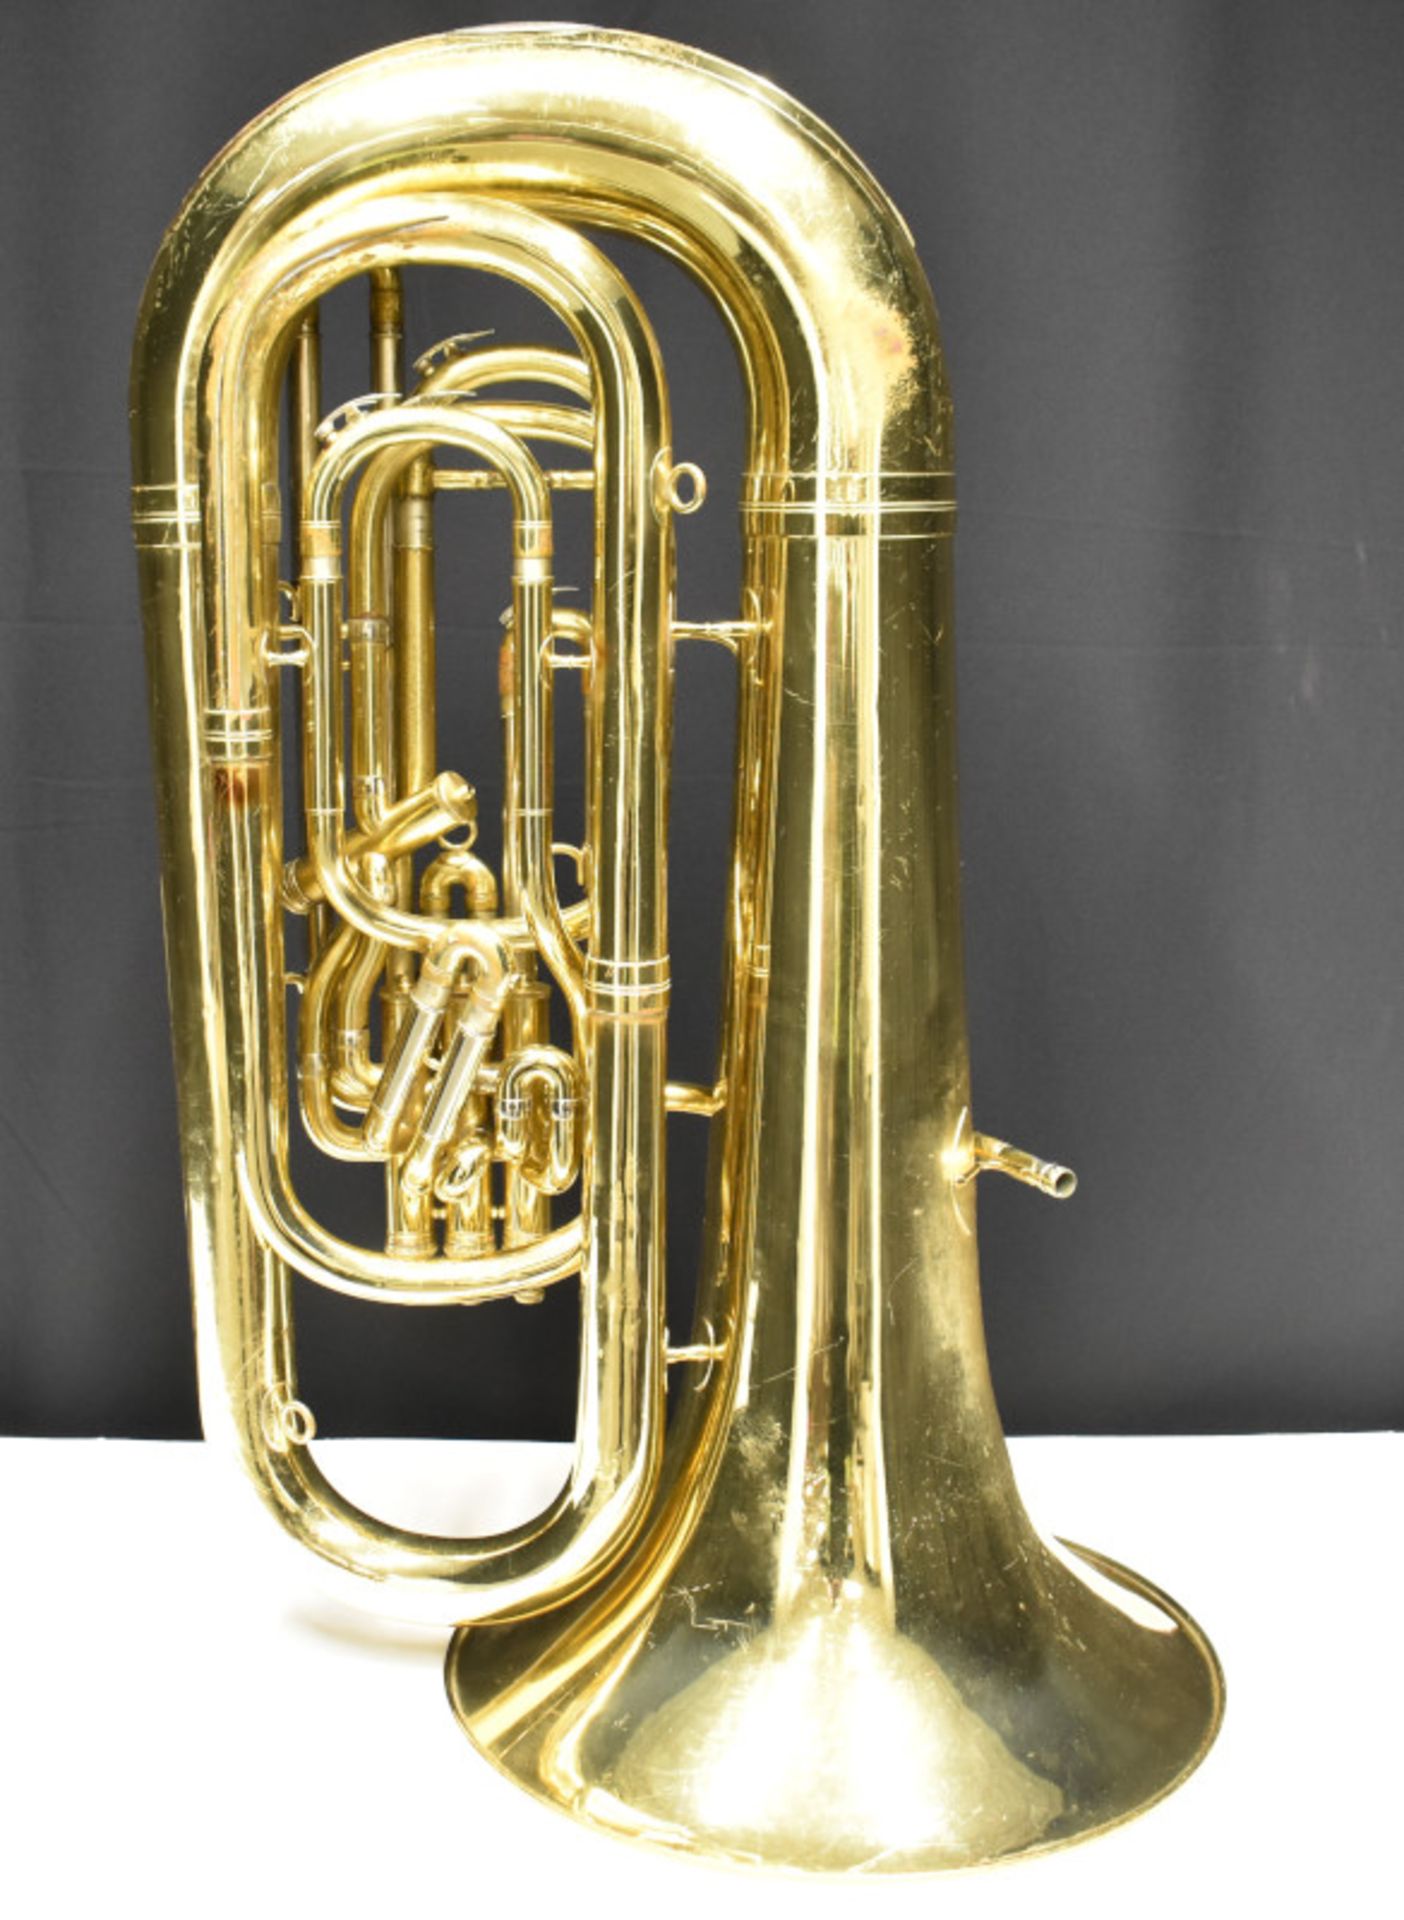 Besson Sovereign BE994 Tuba in Besson Case (case damaged no wheels) - Serial No. 883092 - - Image 8 of 21